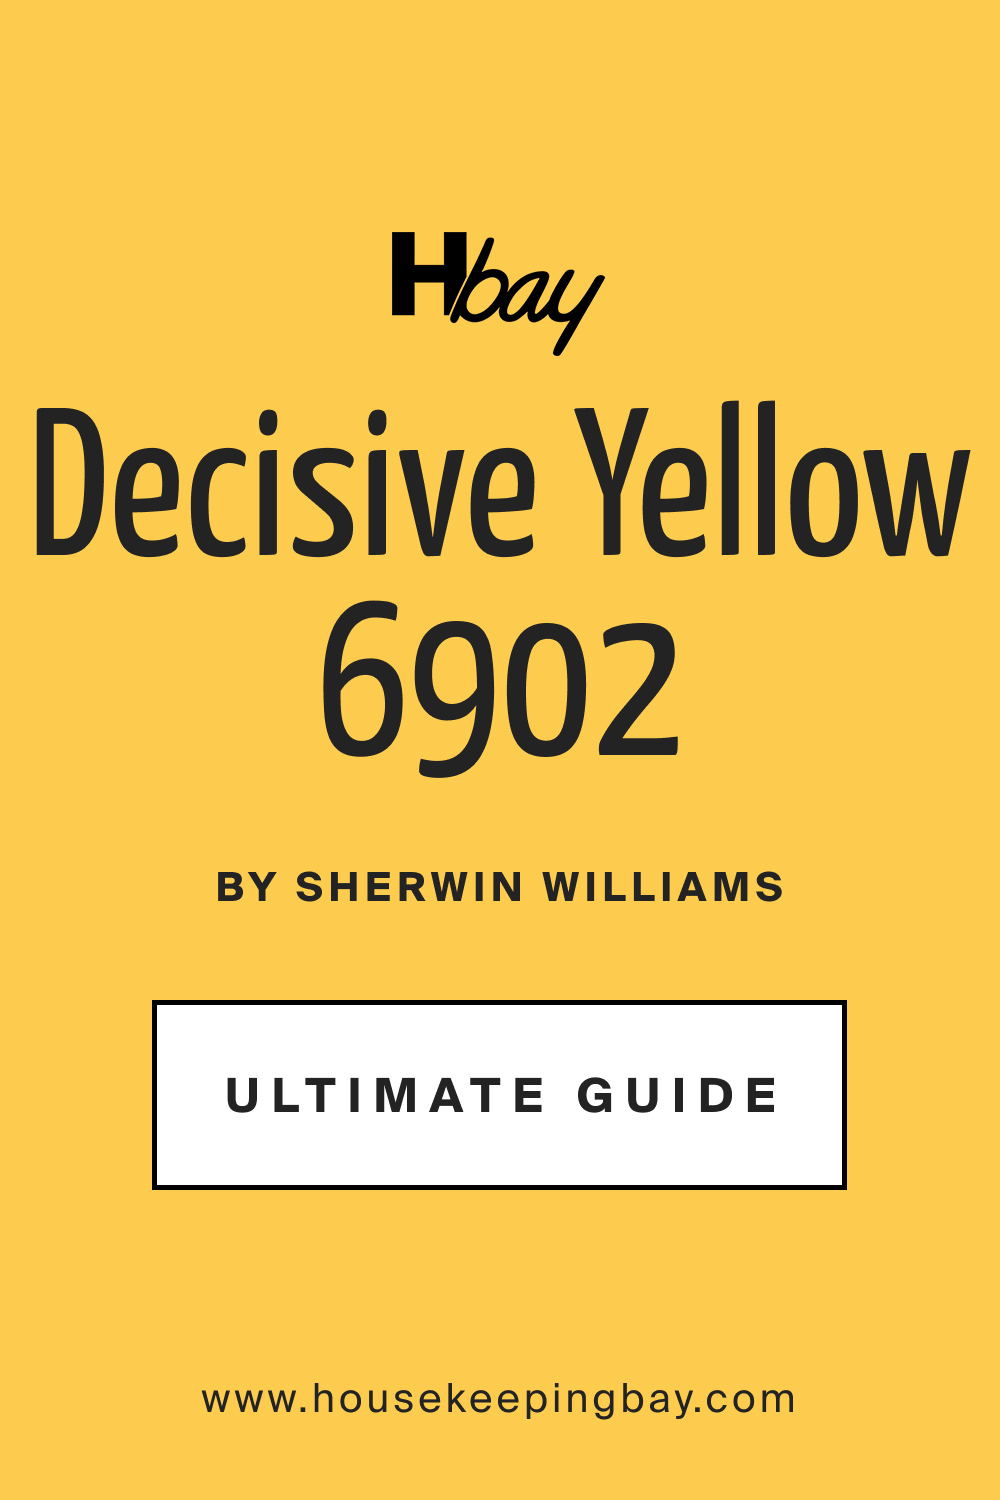 Decisive Yellow SW 6902 by Sherwin Williams Ultimate Guide